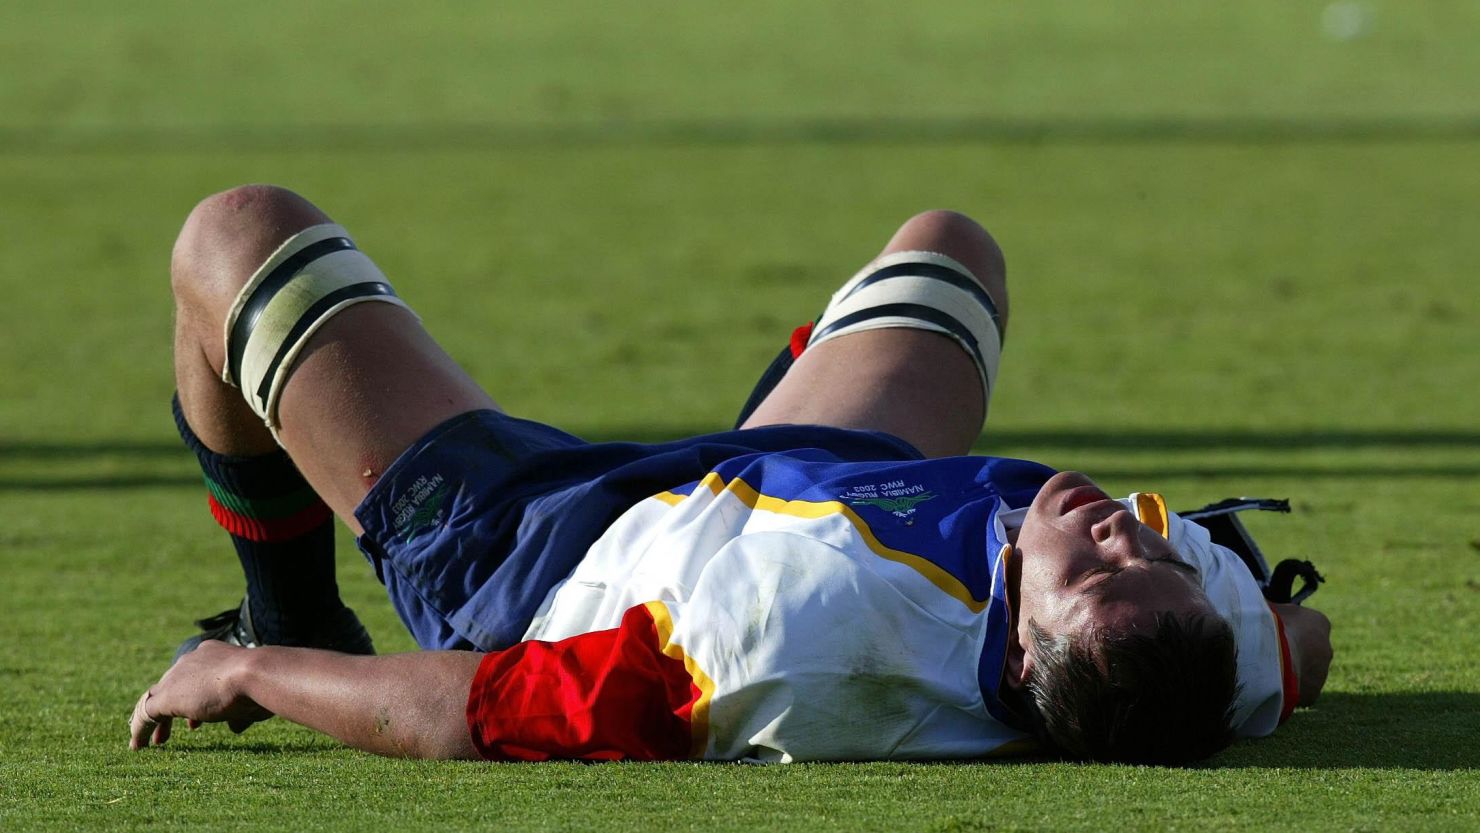 Namibia's Jurgens van Lill lies flat out after Australia score yet another try in thier 142-0 victory during the Rugby World Cup Pool A match at the Oval Stadium, Adelaide. NO MOBILE PHONE USE. INTERNET SITES MAY ONLY USE ONE IMAGE EVERY FIVE MINUTES DURING THE MATCH   (Photo by David Davies - PA Images/PA Images via Getty Images)